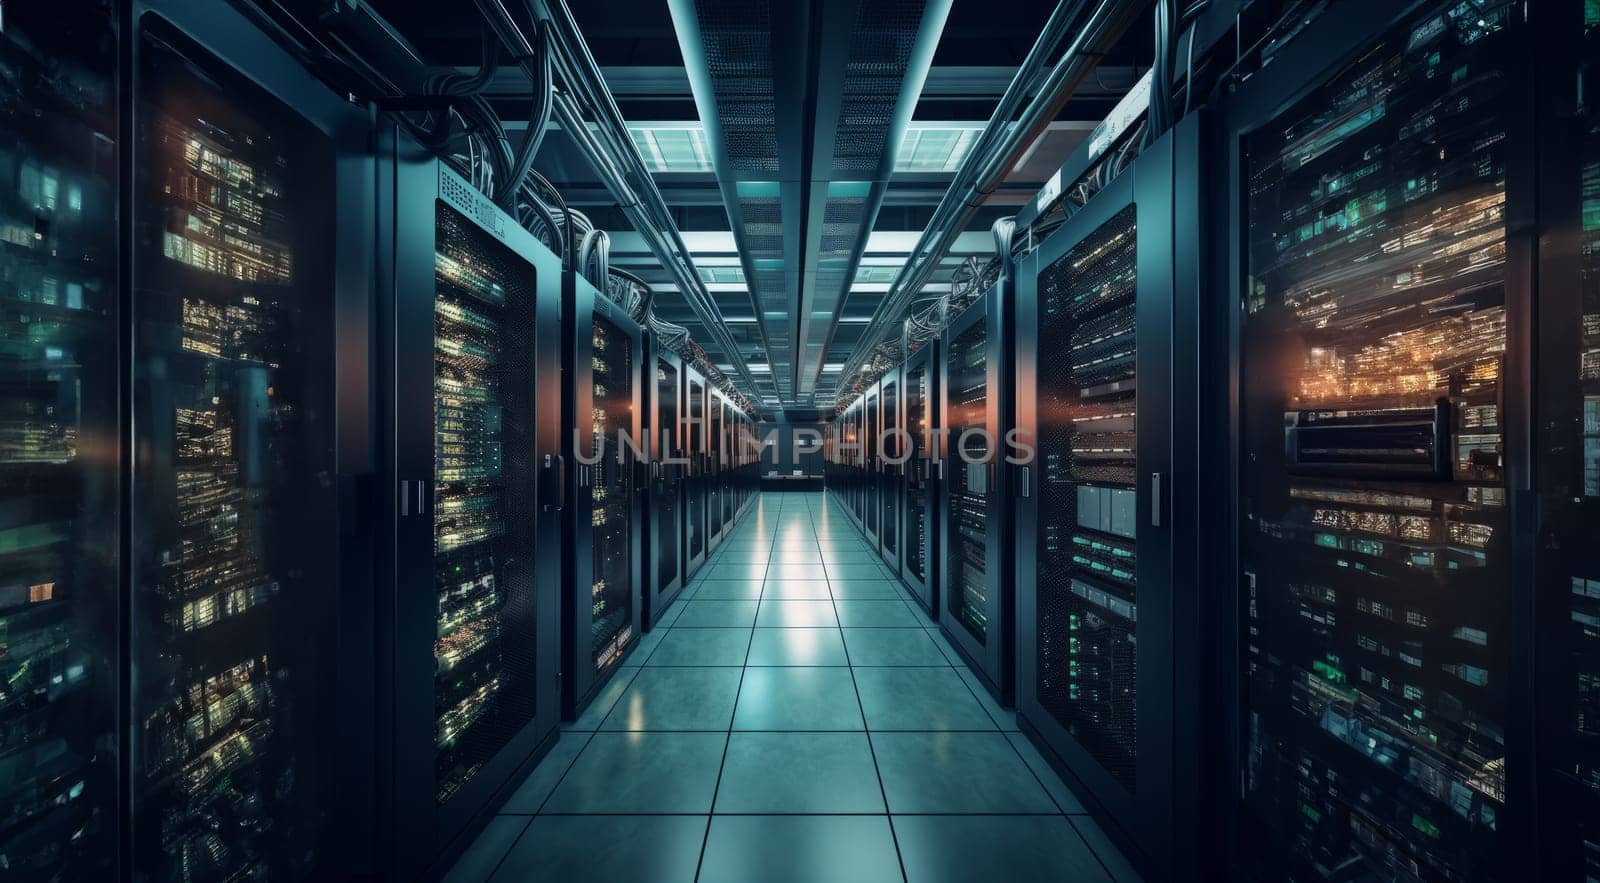 The photograph captures the interior of a modern, spacious server room, showcasing rows of equipment, racks, and cables, illustrating the technological infrastructure and complexity required for data management and network operations.Generated image.